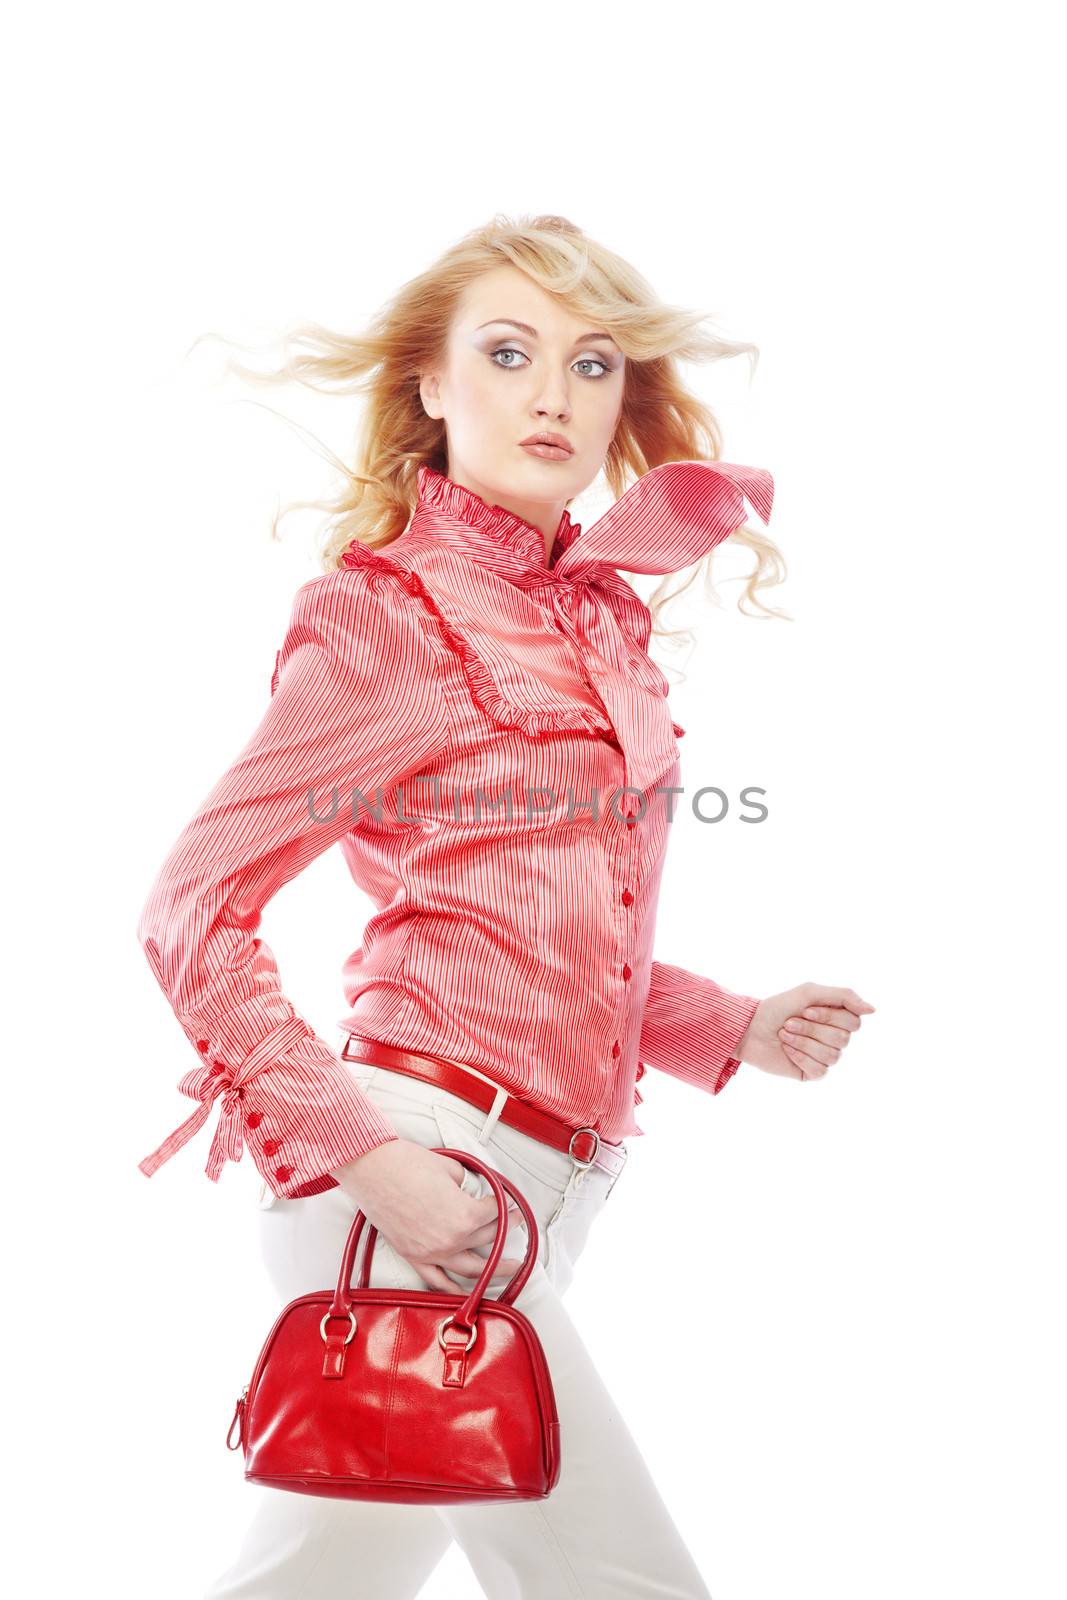 Moving lady in stylish clothes with red bag